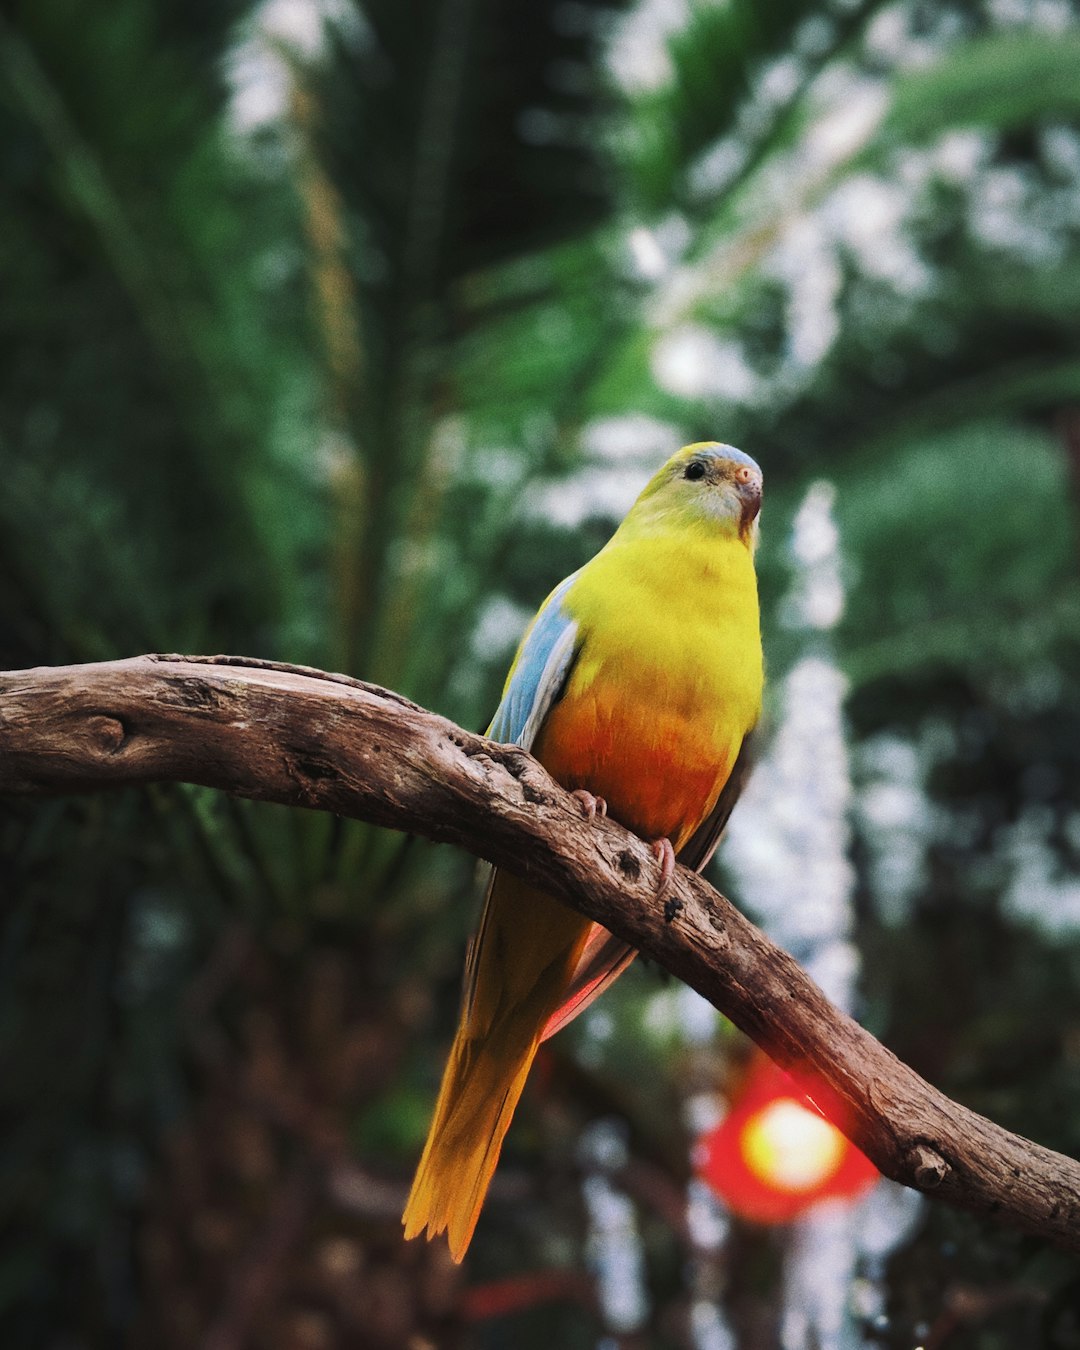 travelers stories about Wildlife in Bloedel Conservatory, Canada